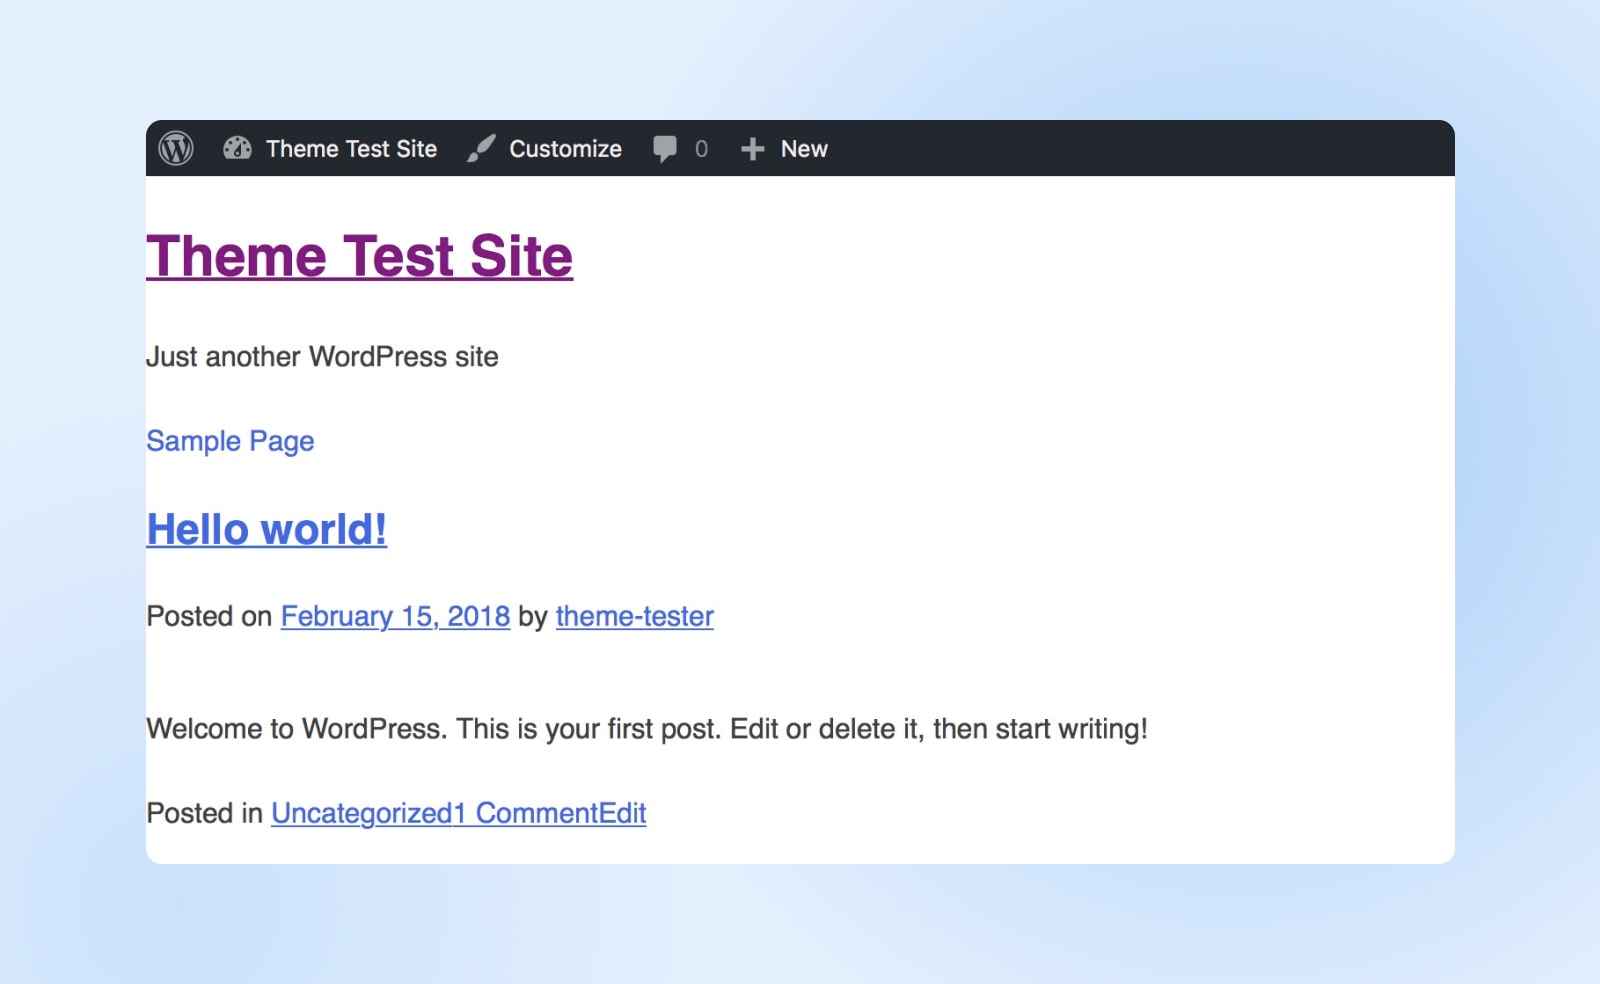 Theme Test Site showing blue hyperlinks on the page including "Hello word" and "theme-tester" 